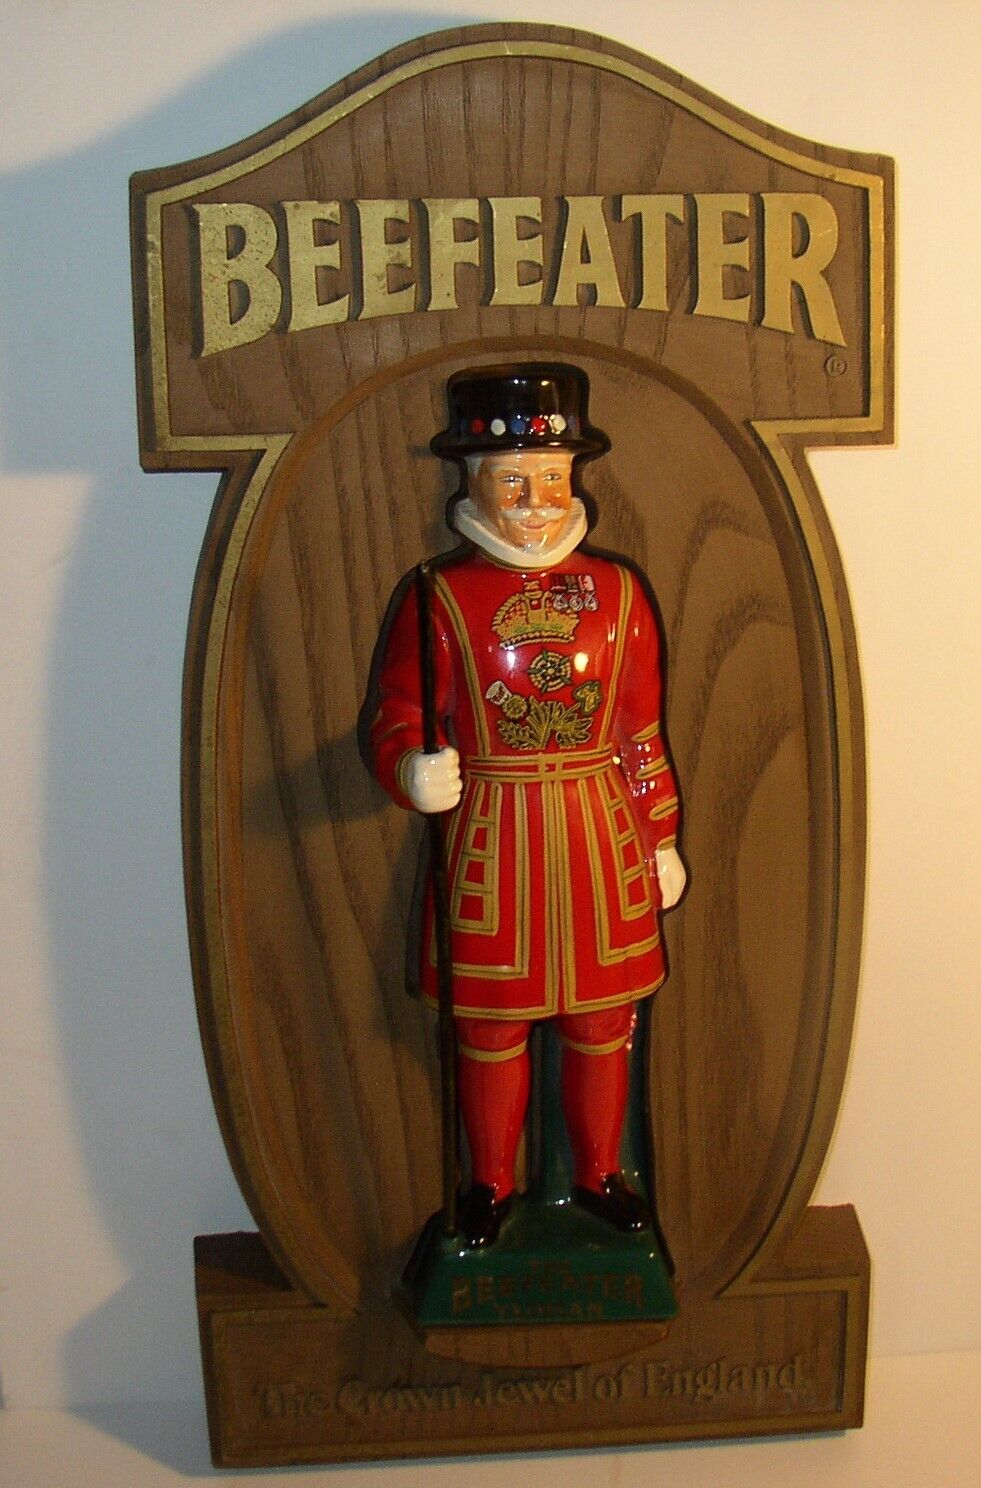 Vintage The Beefeater Yeoman Gin Sign w/ Ceramic Figure Crown Jewel Of England